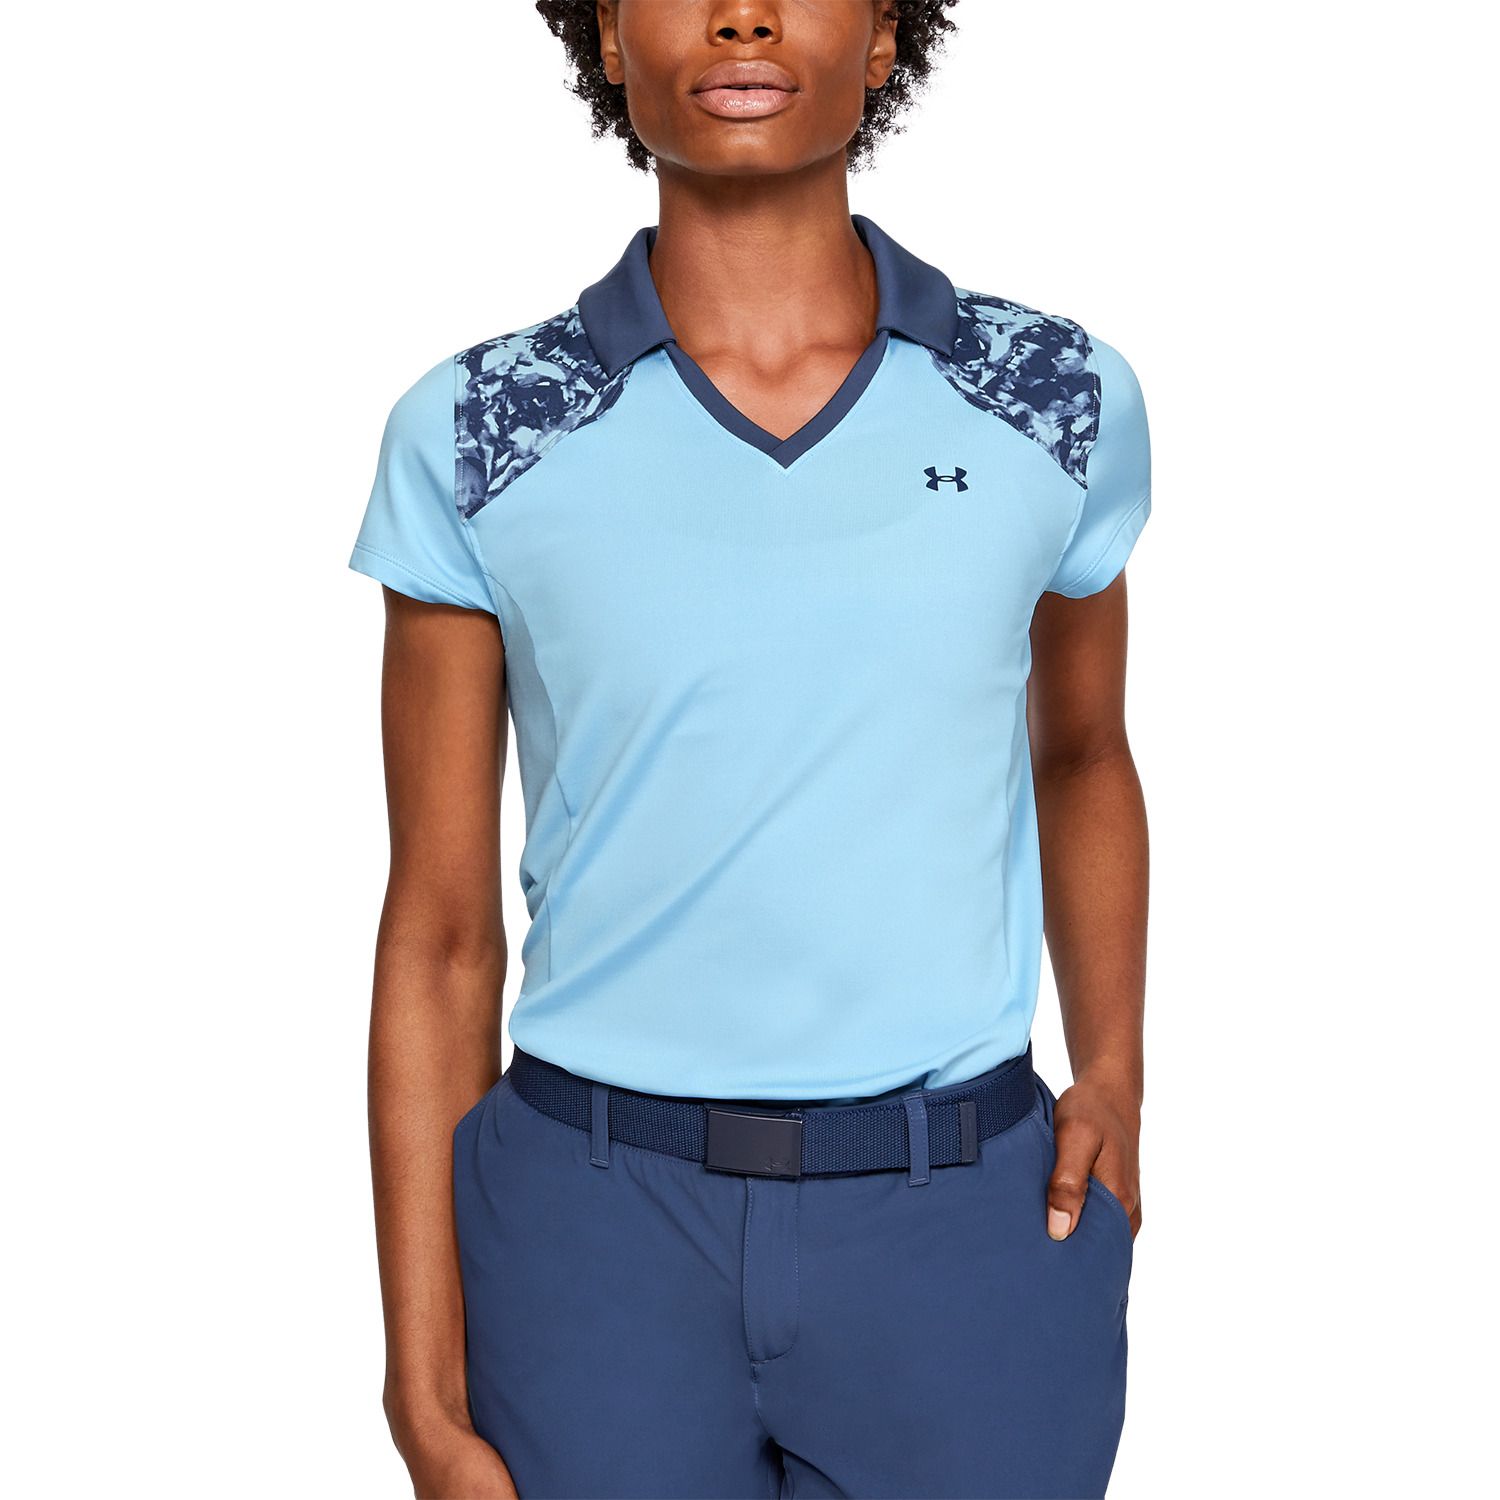 Under Armour Golf Clothing | Kohl's